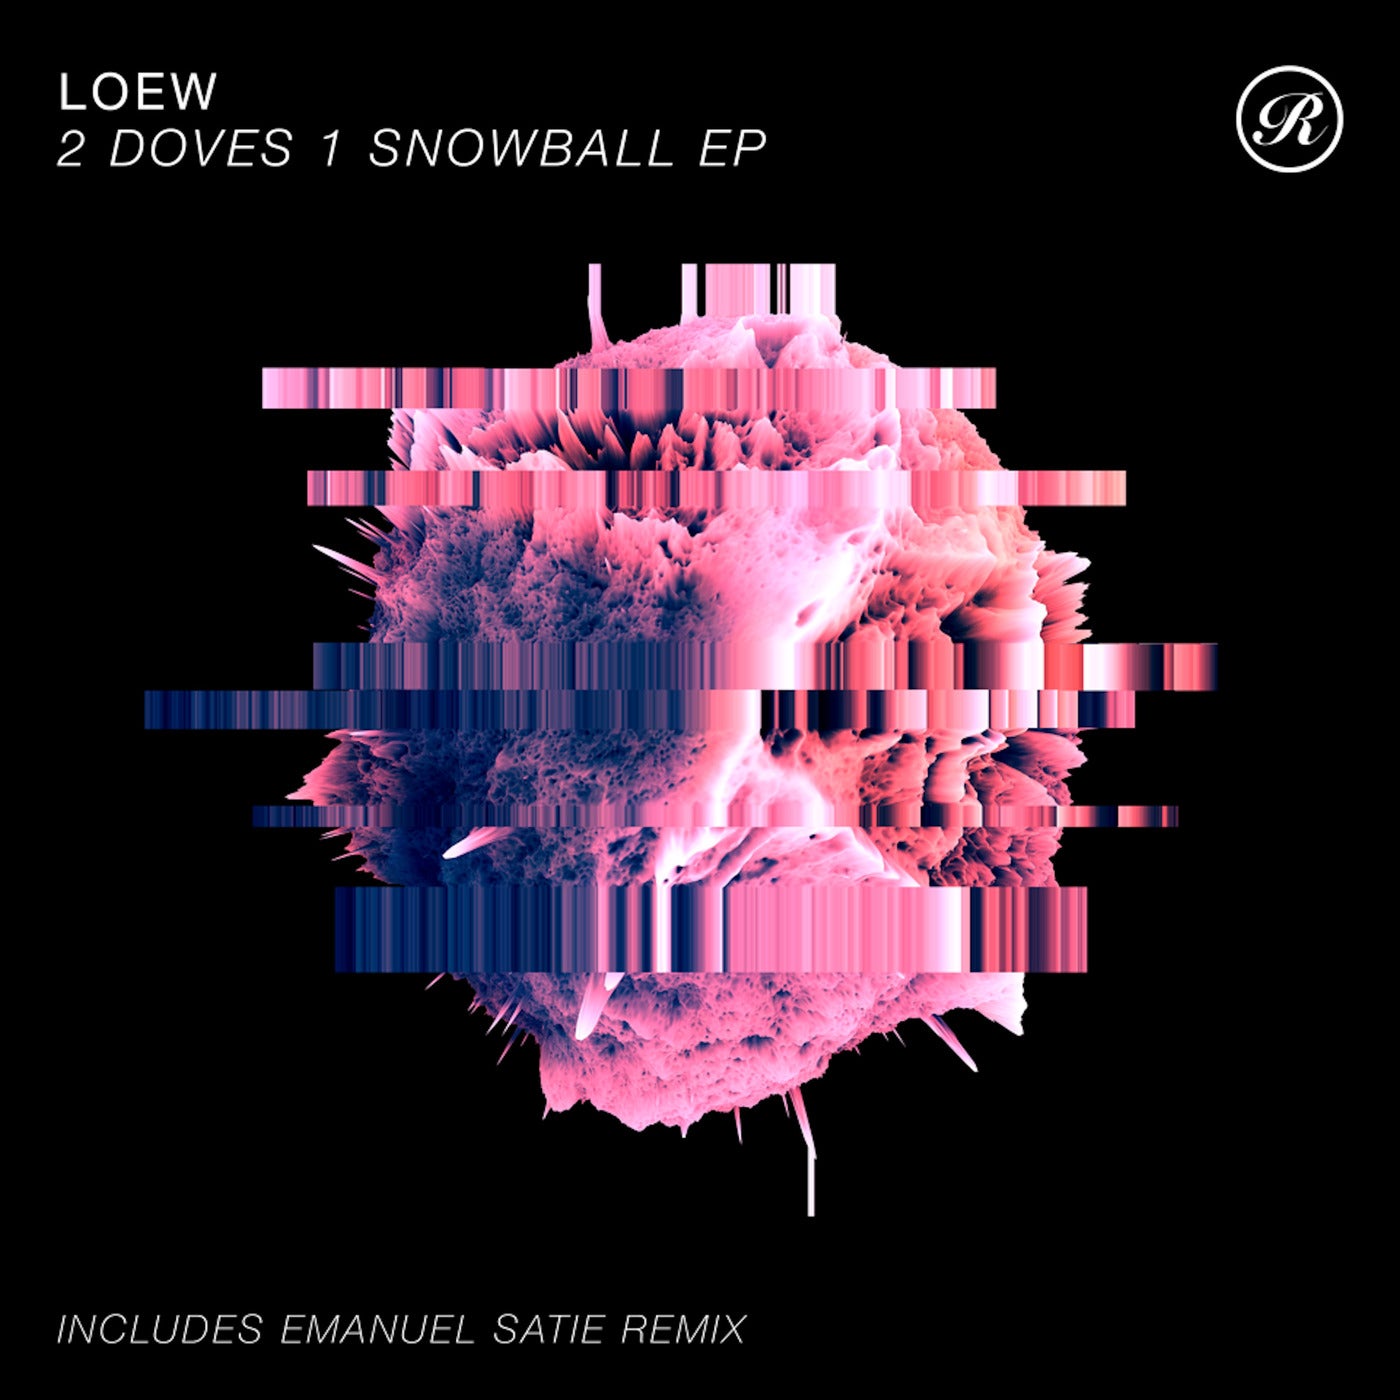 image cover: Loew - 2 Doves 1 Snowball EP / REN2108D